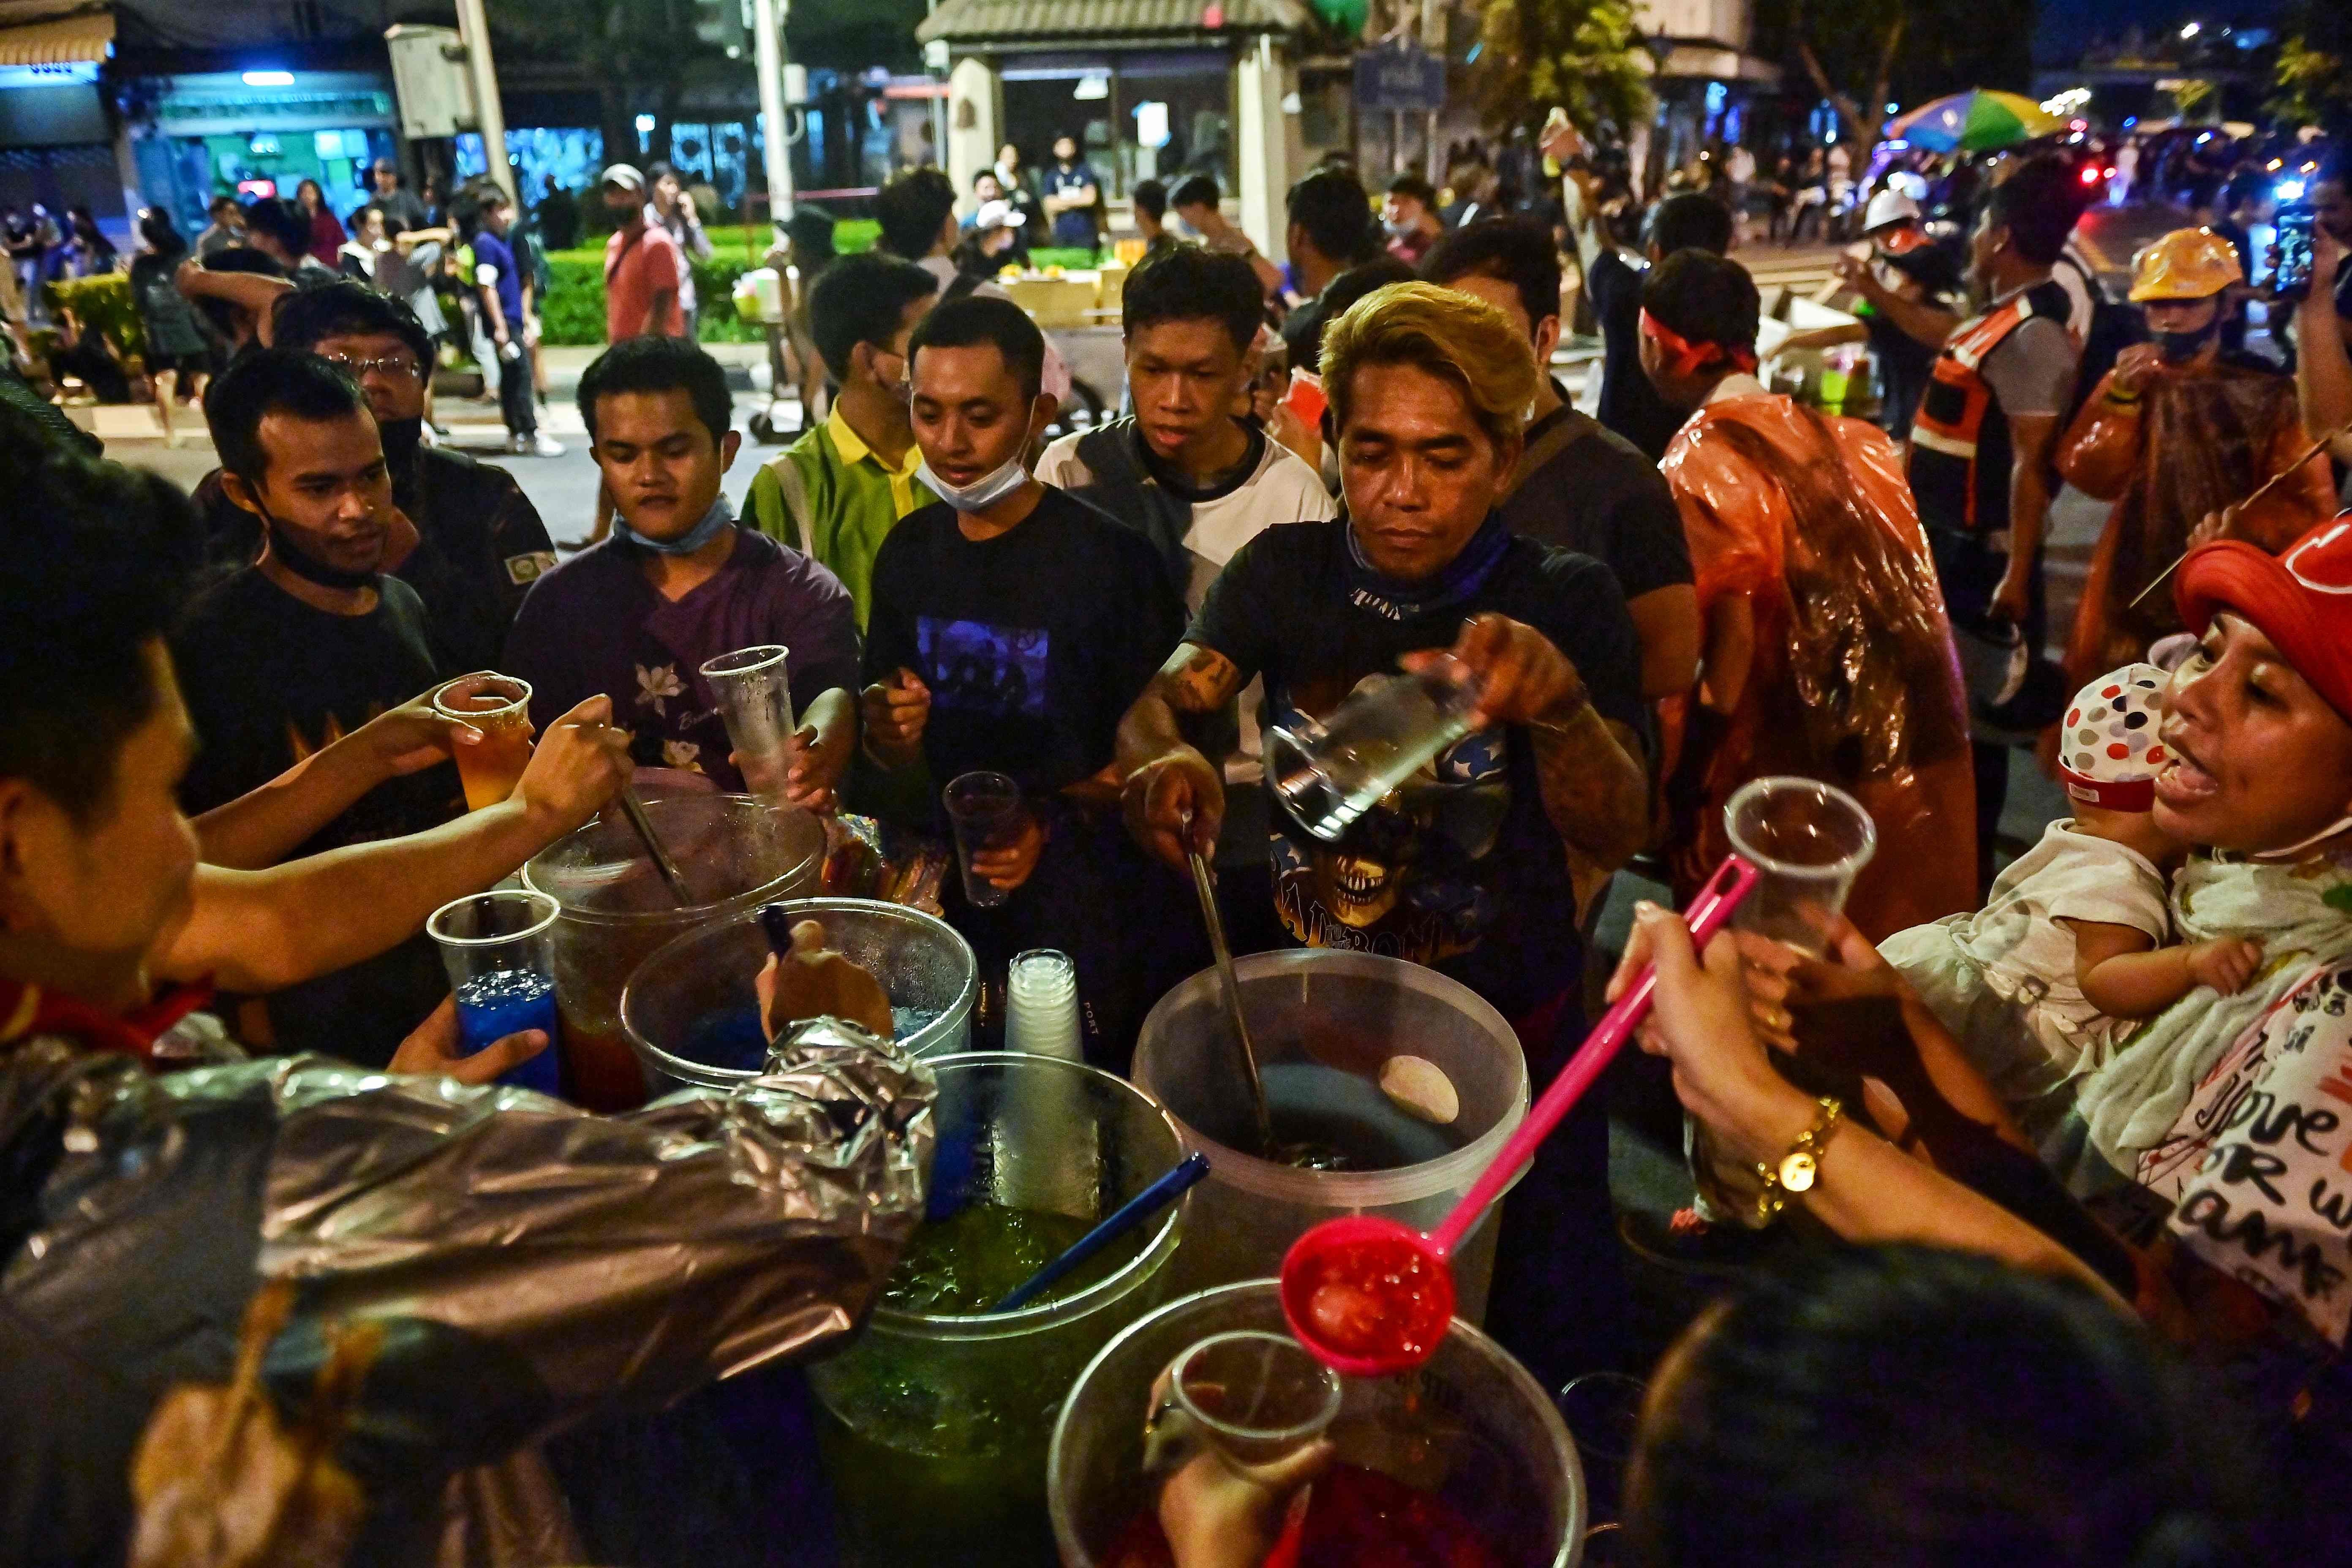 Pro-democracy protesters pause to grab drinks from a street vendor in Bangkok on Wednesday